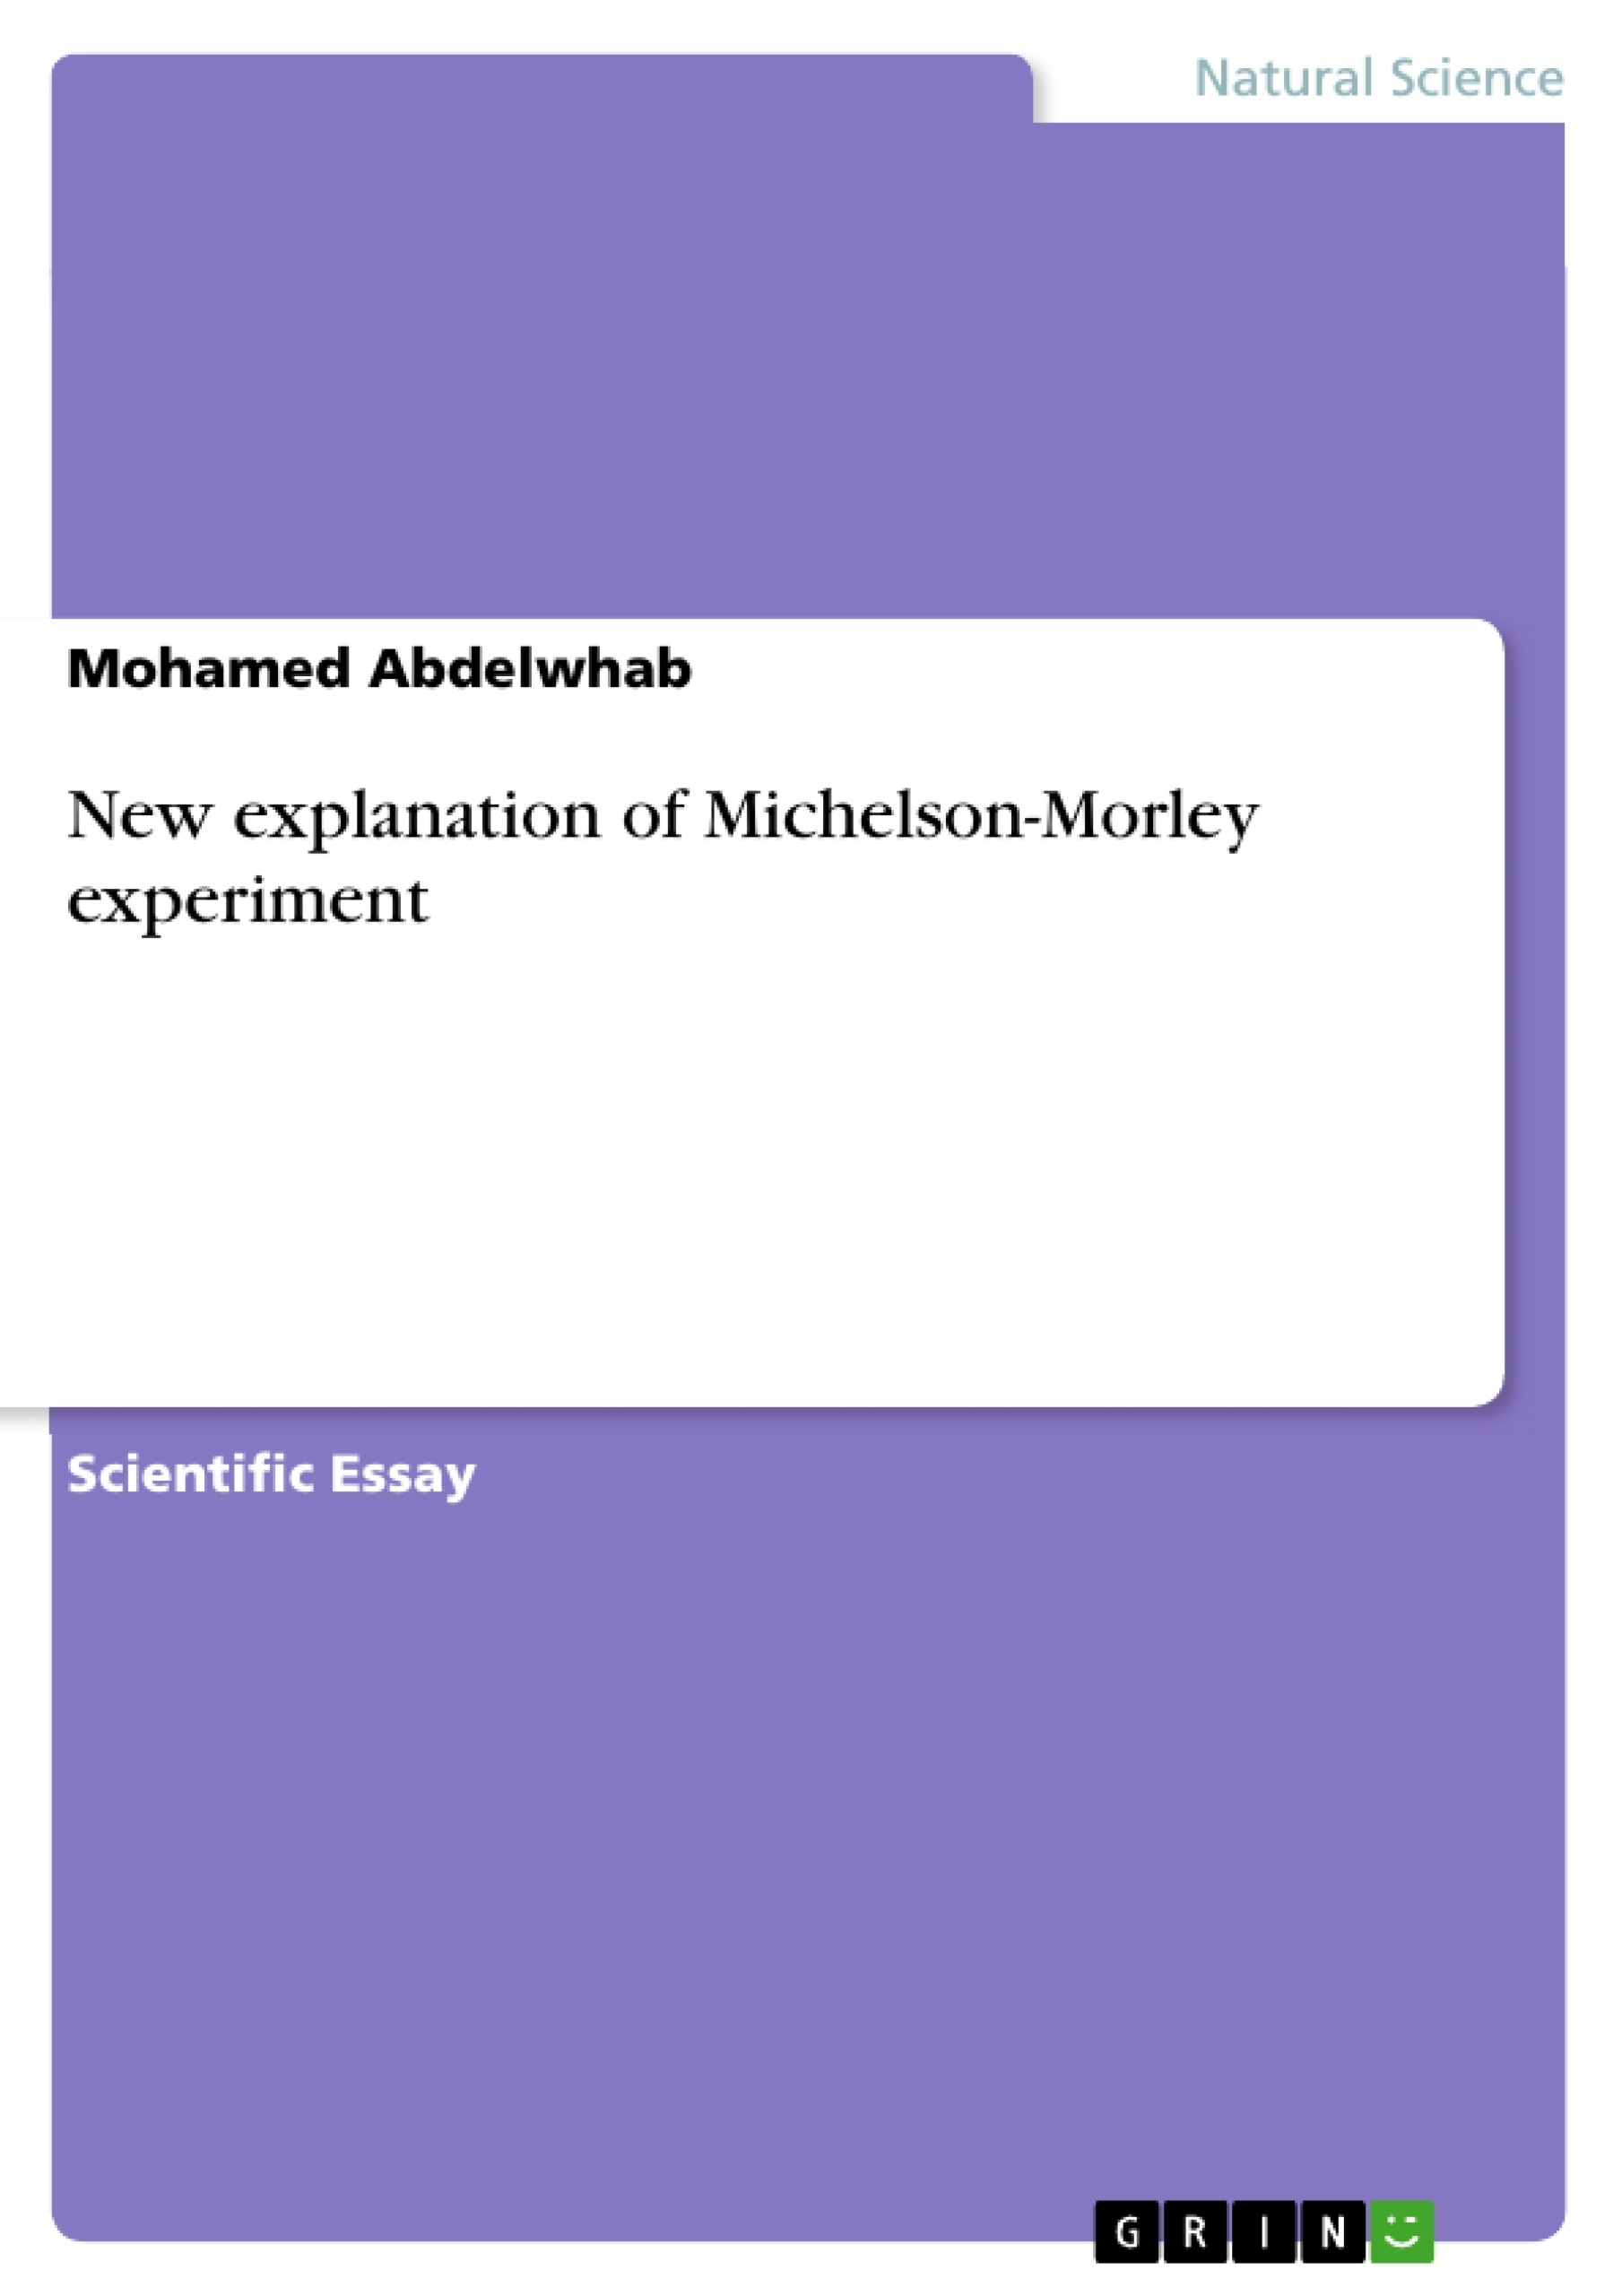 Title: New explanation of Michelson-Morley experiment